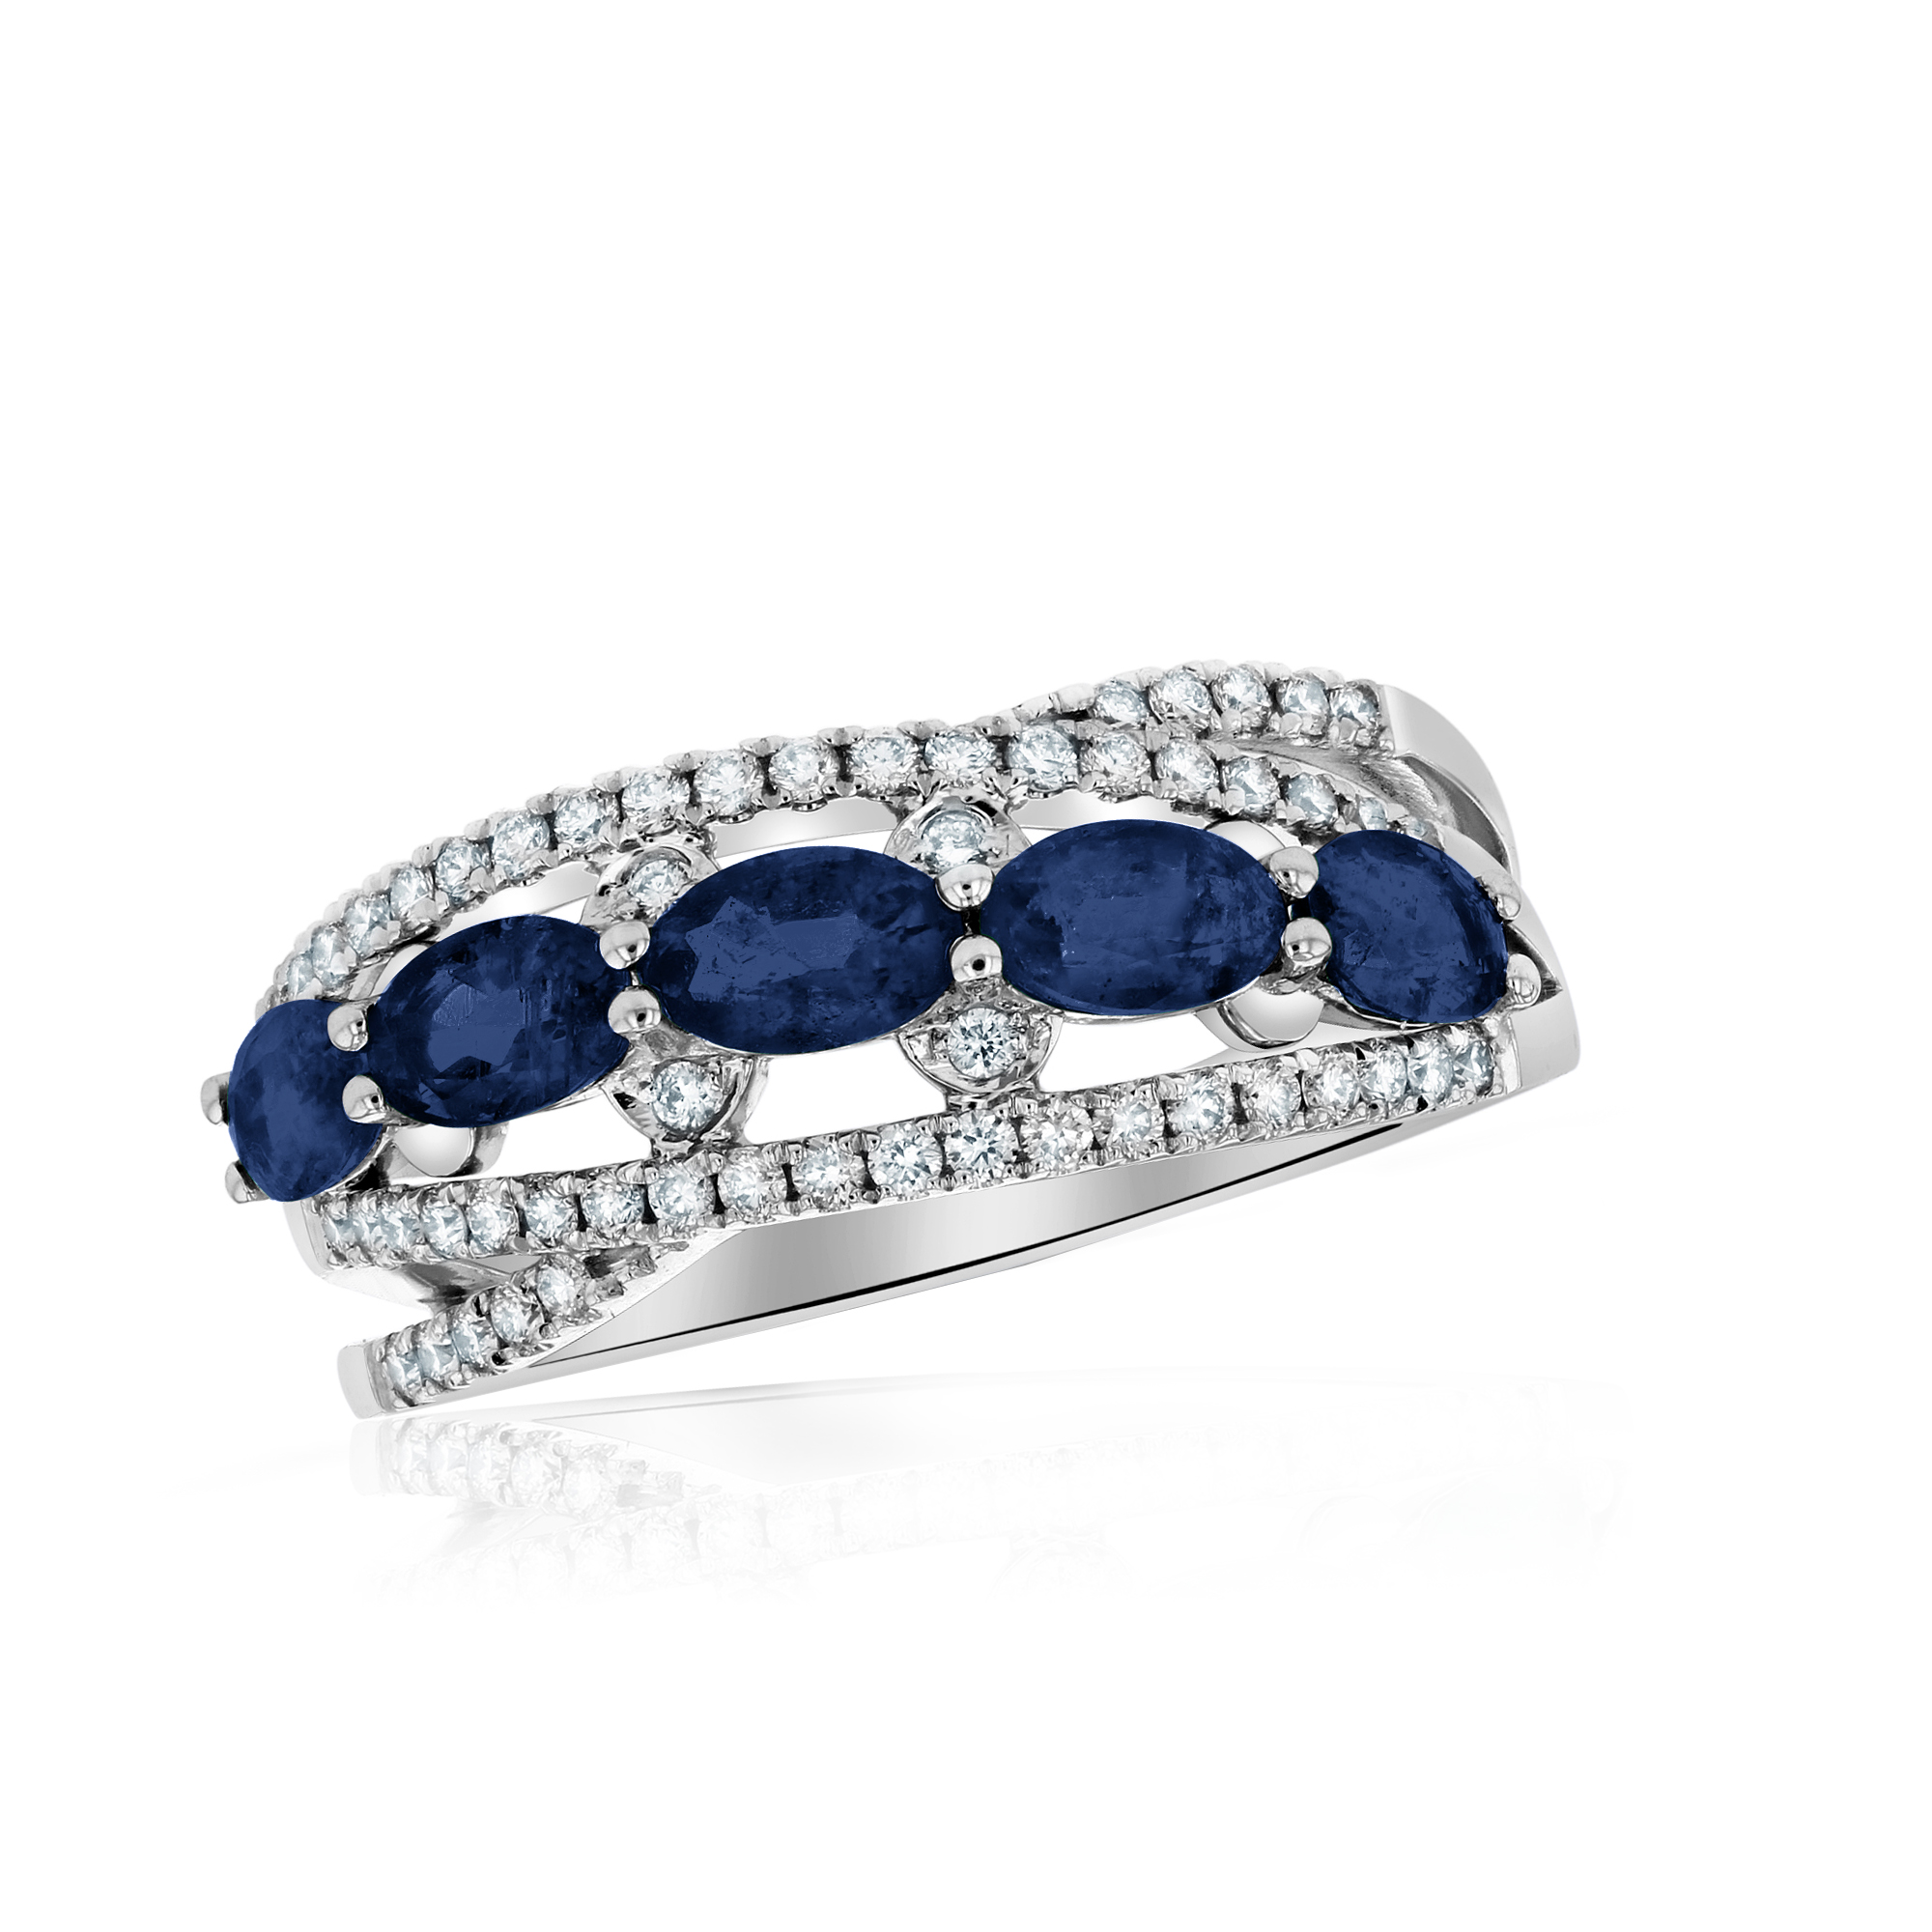 View 1.81ctw Diamond and Sapphire Ring in 14k White Gold